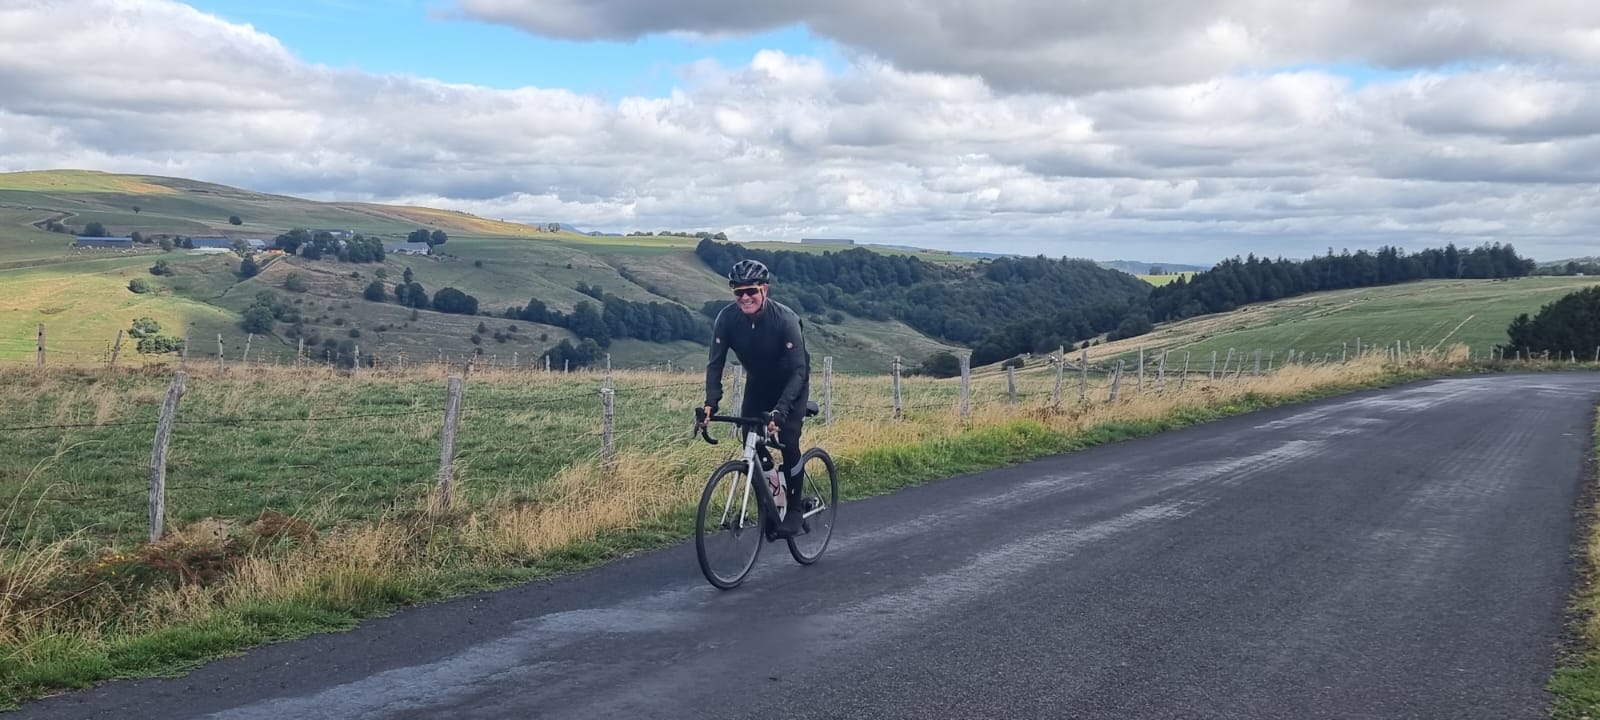 Cycling Challenges: Maintaining Motivation